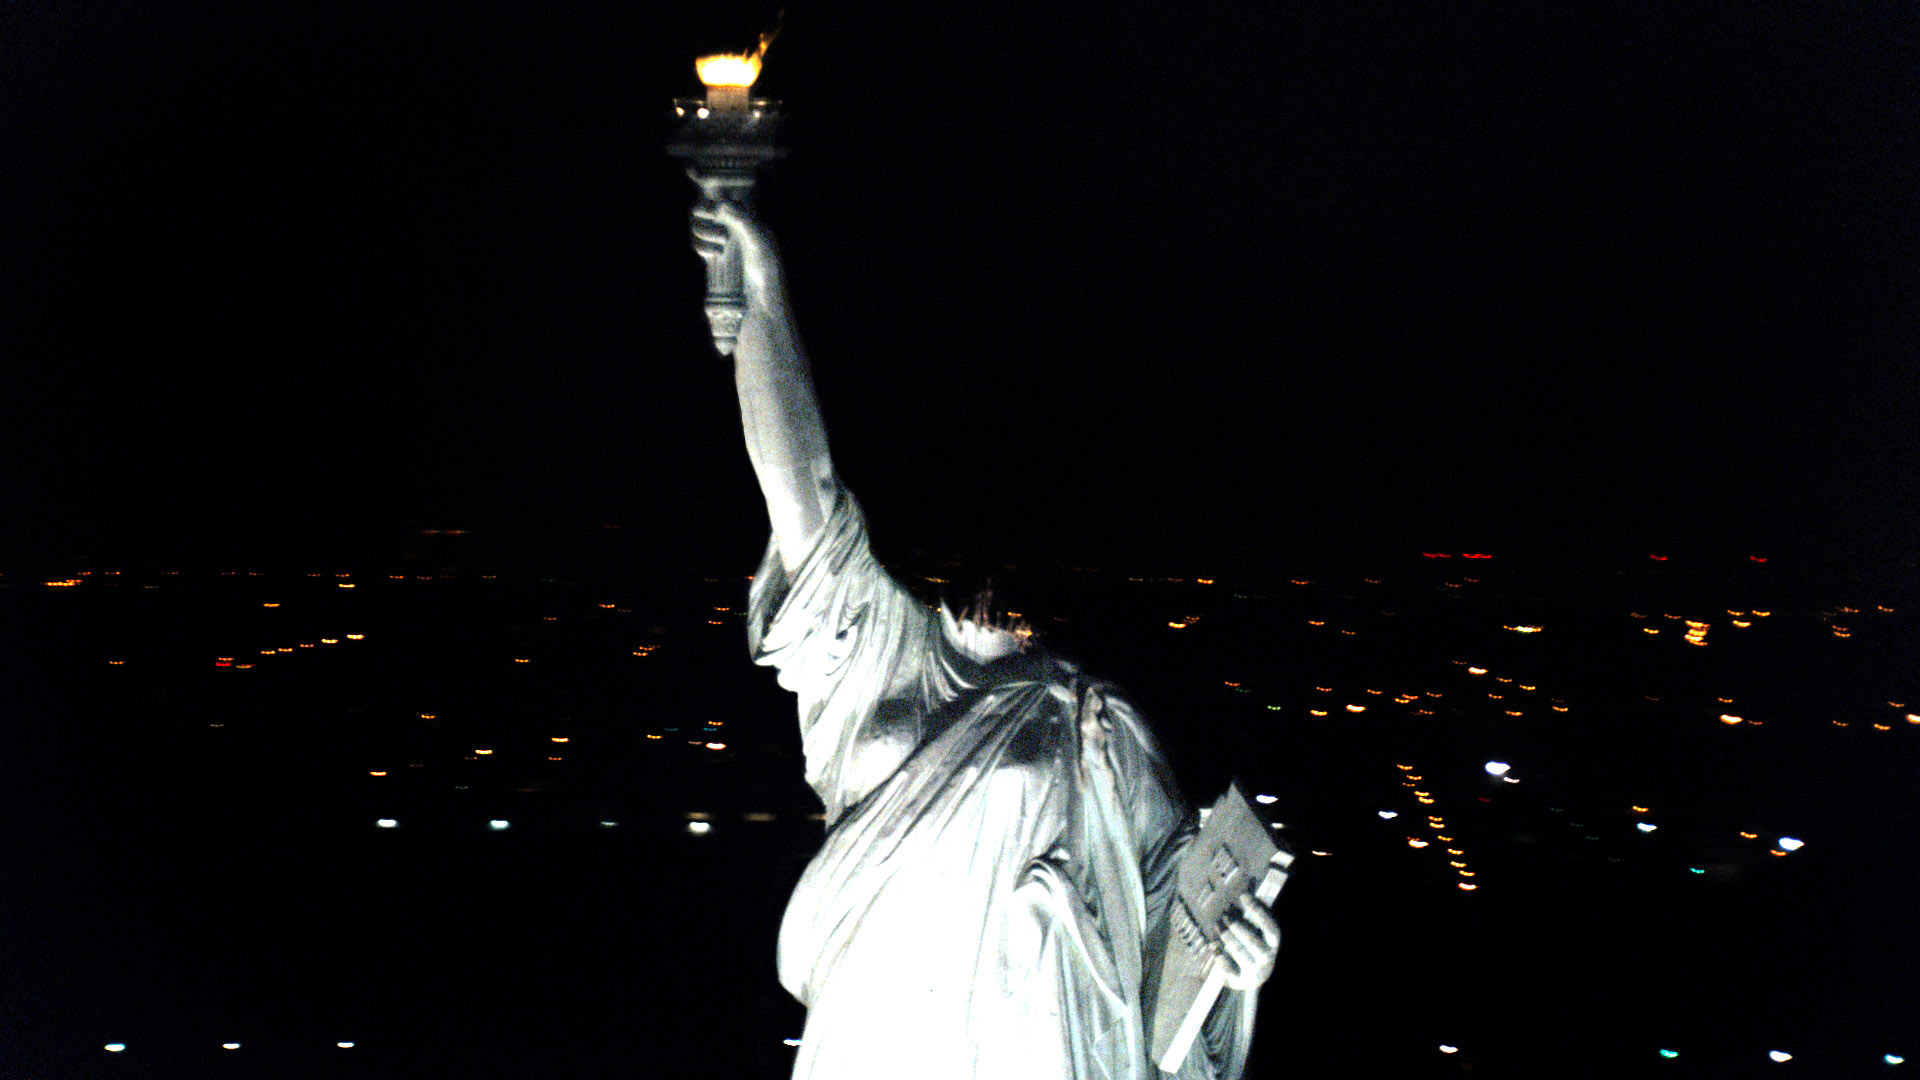 The Statue of Liberty without a head